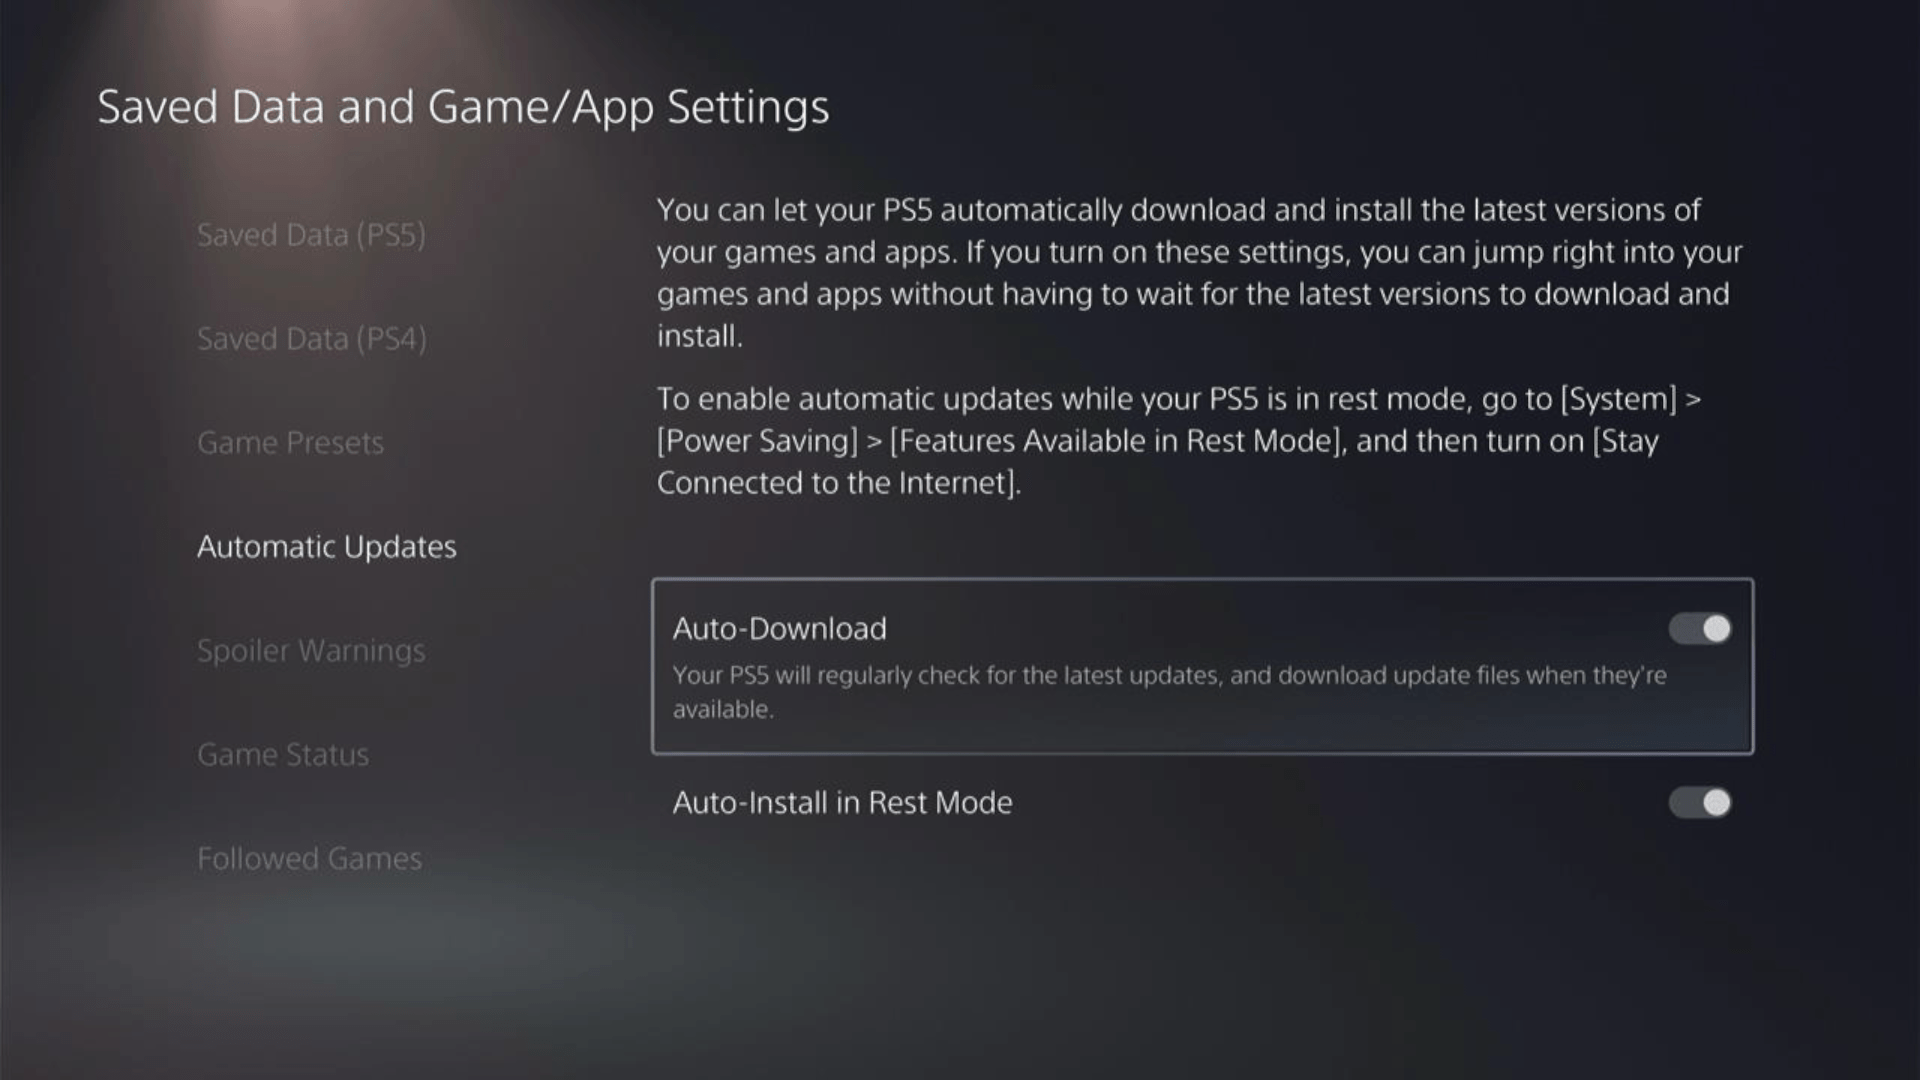 In the Saved Data and Game/App Settings window, select Automatic Updates from the left sidebar to enable automatic game updates to avoid Error Code CE-108255-1